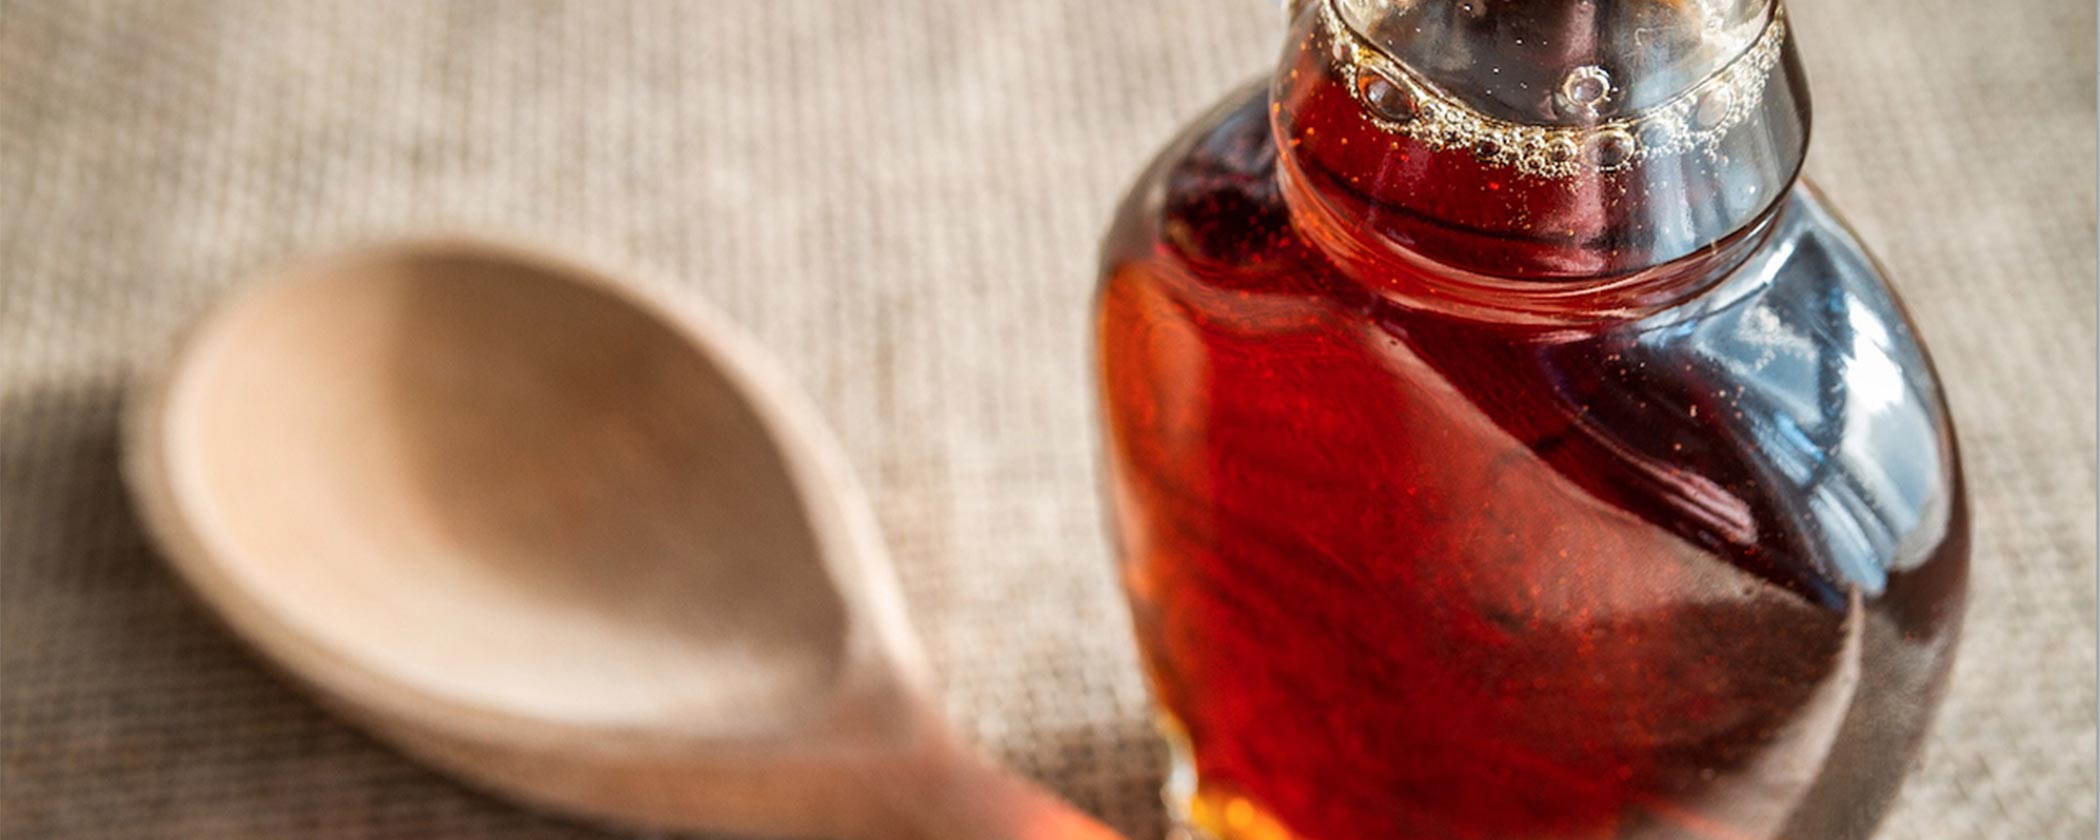 wooden spoon next to a glass bottle of amber maple syrup